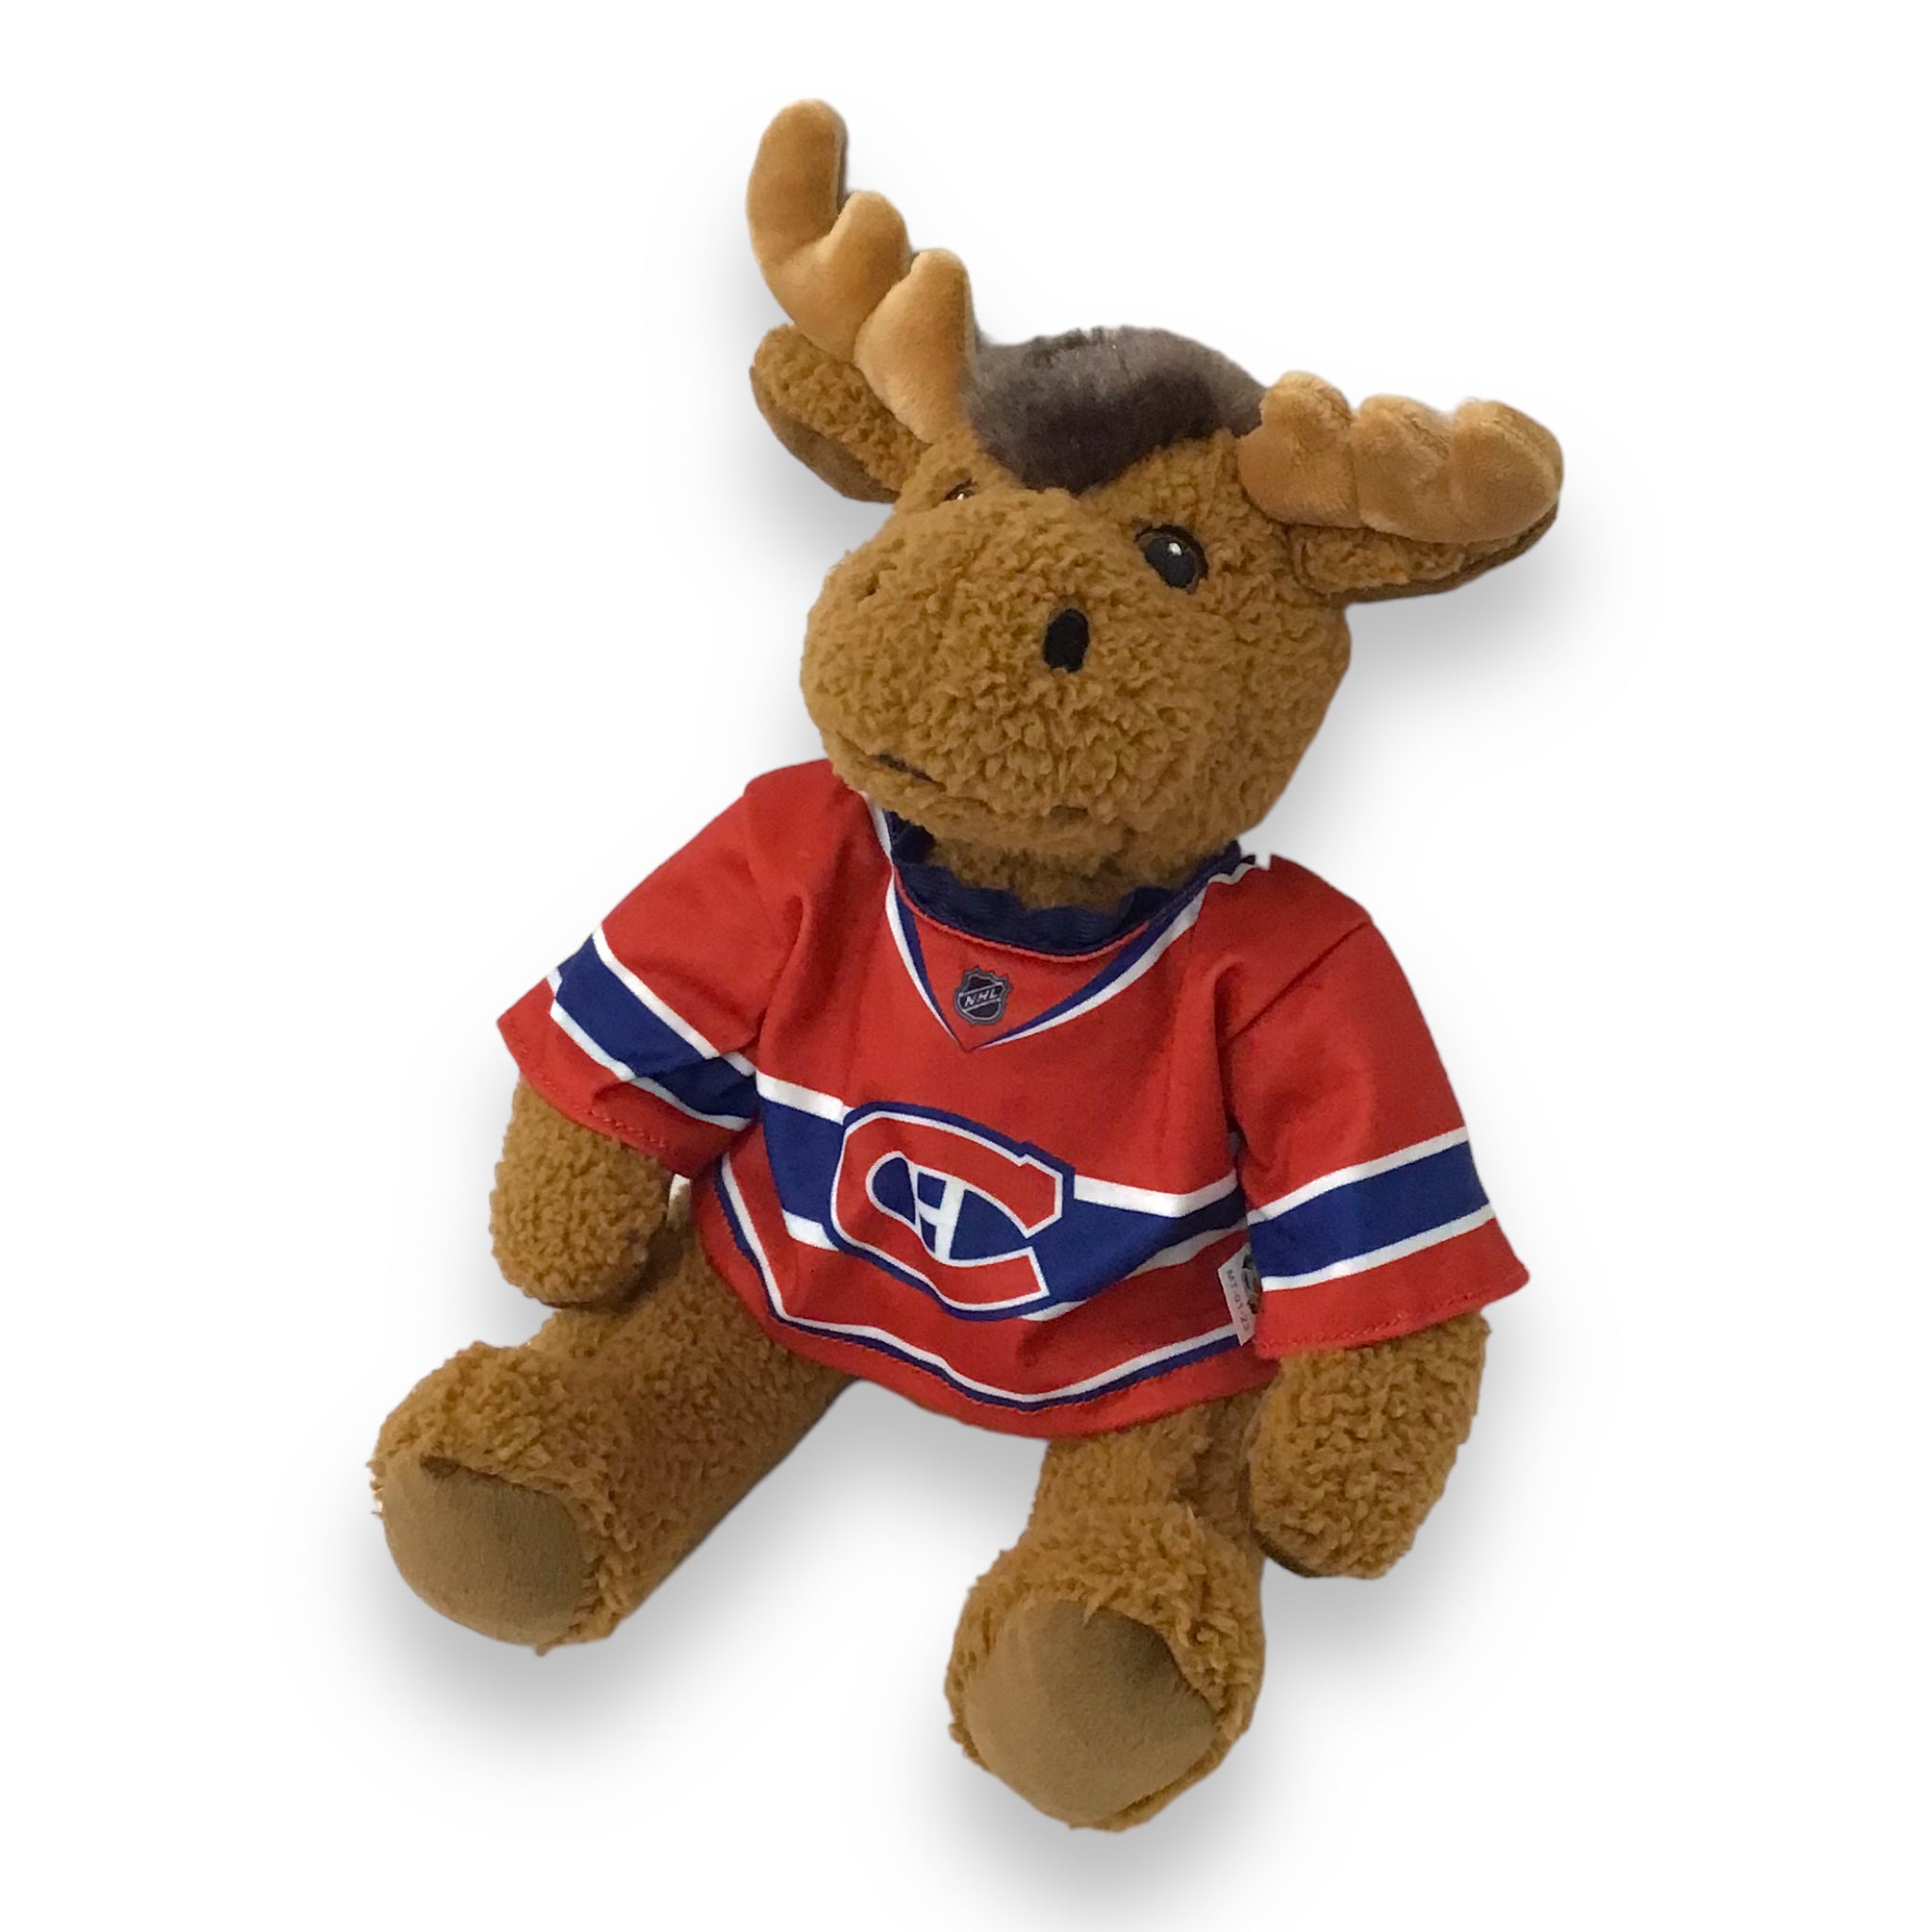 Stuffed Animal Hockey Plush 10-inches Curly Critter Moose - Montreal Canadiens